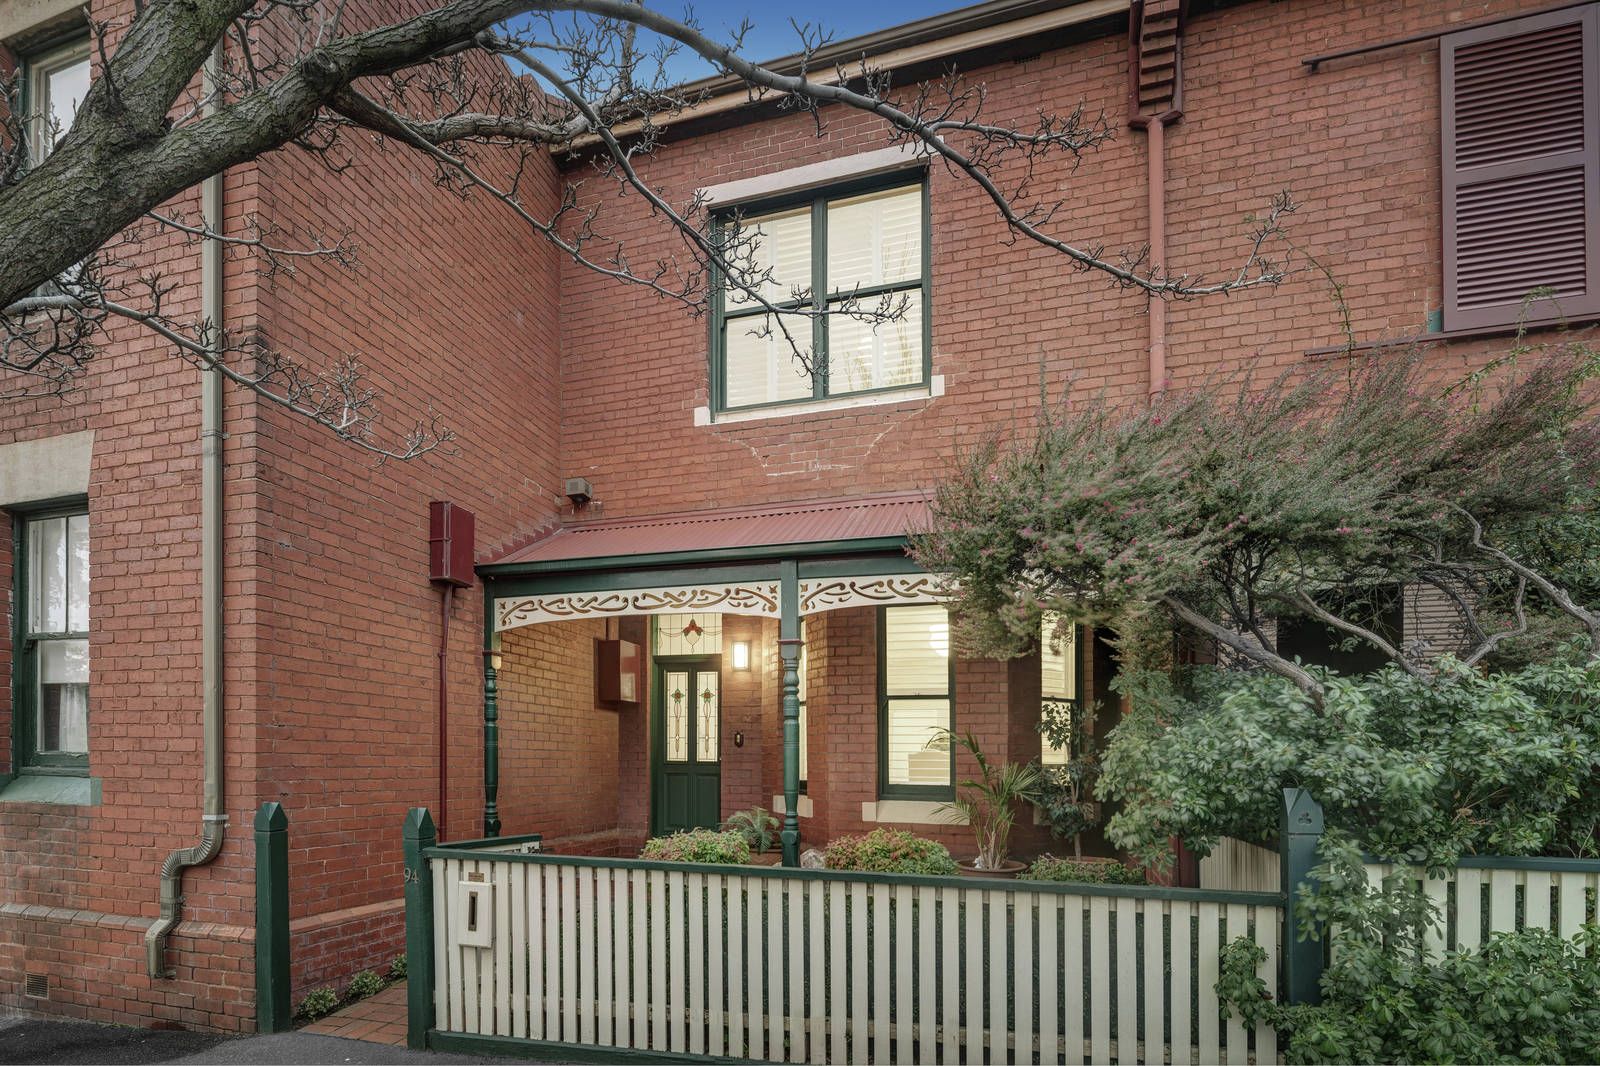 3 bedrooms House in 94 Howard Street NORTH MELBOURNE VIC, 3051